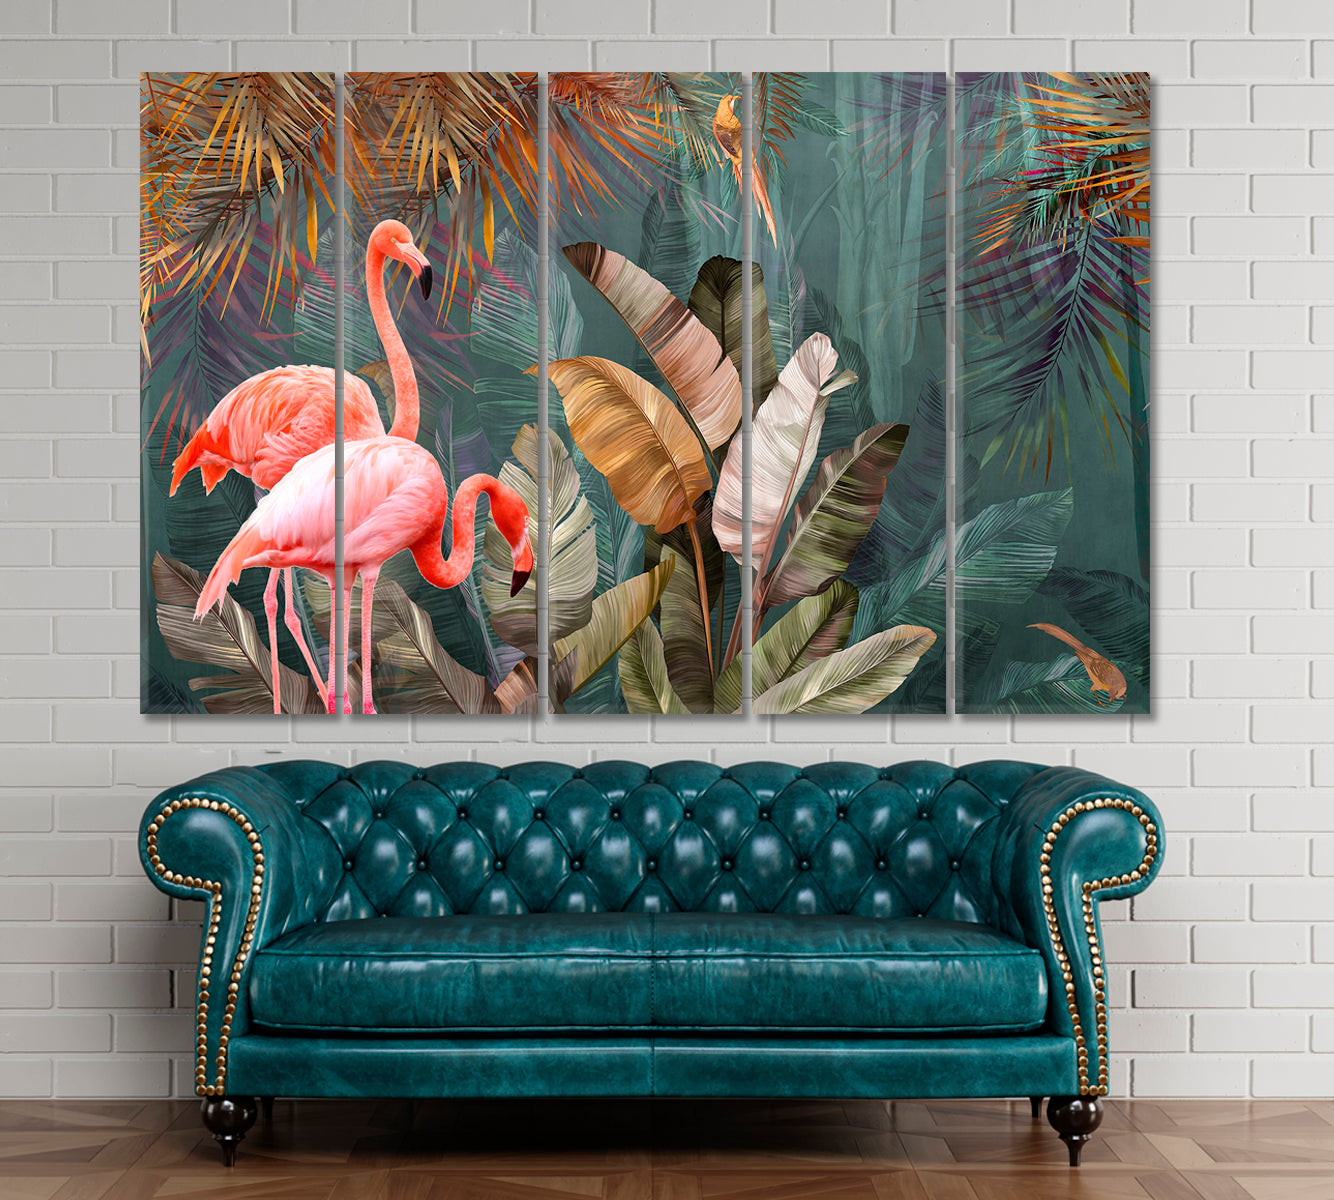 Flamingo And Tropical Jungle Rainforest Pattern Poster Tropical, Exotic Art Print Artesty 5 panels 36" x 24" 